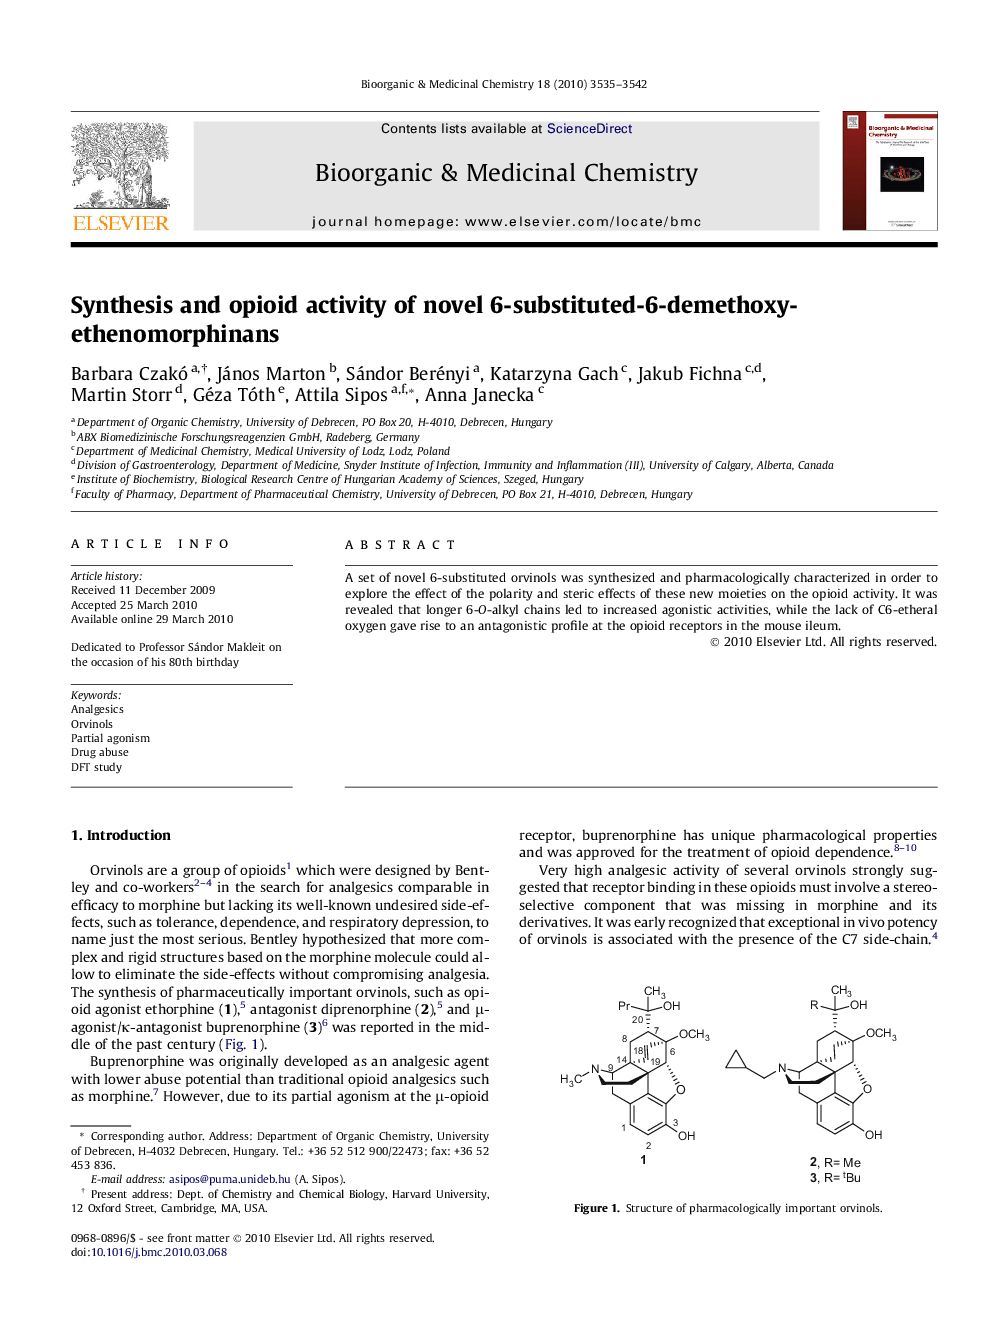 Synthesis and opioid activity of novel 6-substituted-6-demethoxy-ethenomorphinans